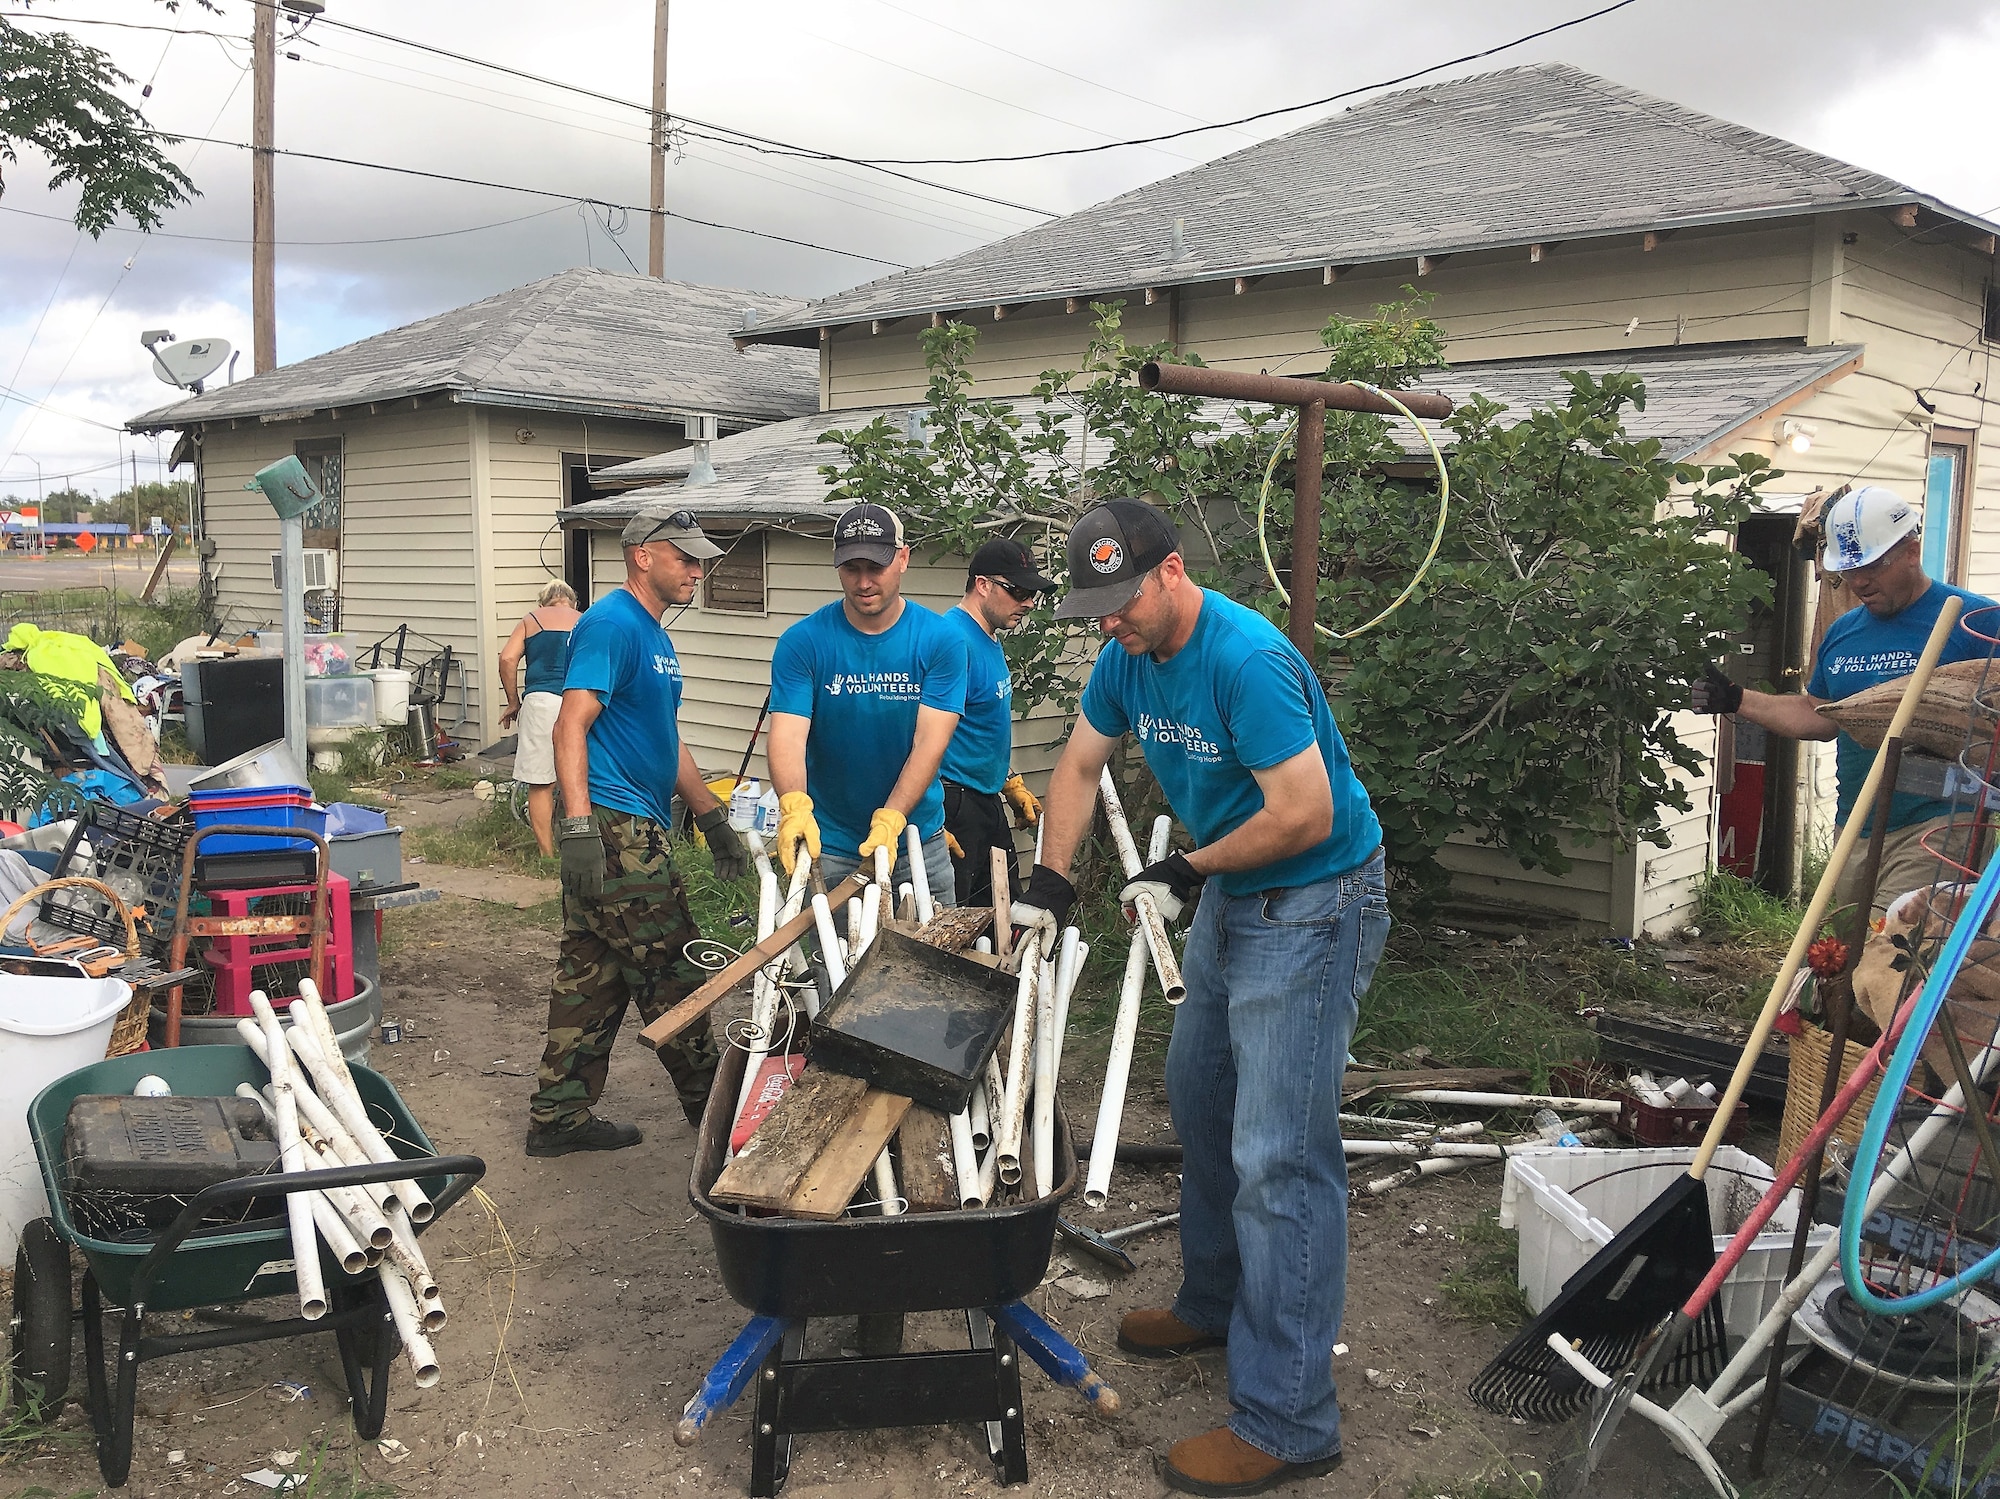 A handful of Airmen from the 96th Flying Training Squadron, Laughlin Air Force Base, Texas, help clean up damage to a home caused by Hurrican Harvey in August 2017. “Boxing Bunny” volunteers  pictured here with the homeowner (back to the camera, far right) include - left to right - Lt. Col. Doug Hayes, Maj. Brian Boettger, Lt. Col. Vinny Danna, 96th FTS Commander Lt. Col. Keith Shearin and Lt. Col. Wolfgang Von Aspe. (U.S. Air Force photo Maj. Jacob Hostetler, jan96th FTS)